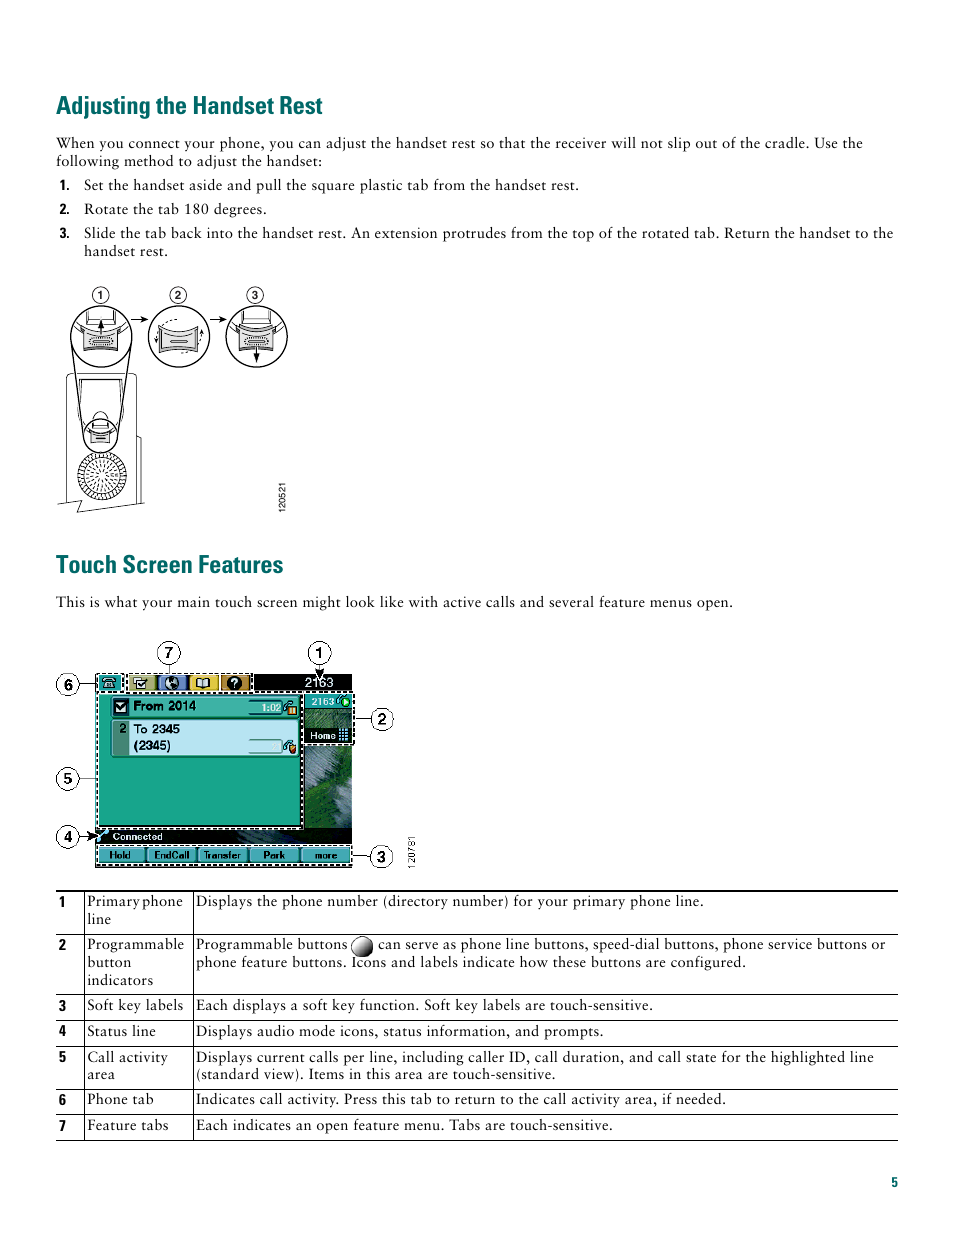 Adjusting the handset rest, Touch screen features | Cisco 7970G User Manual | Page 5 / 20